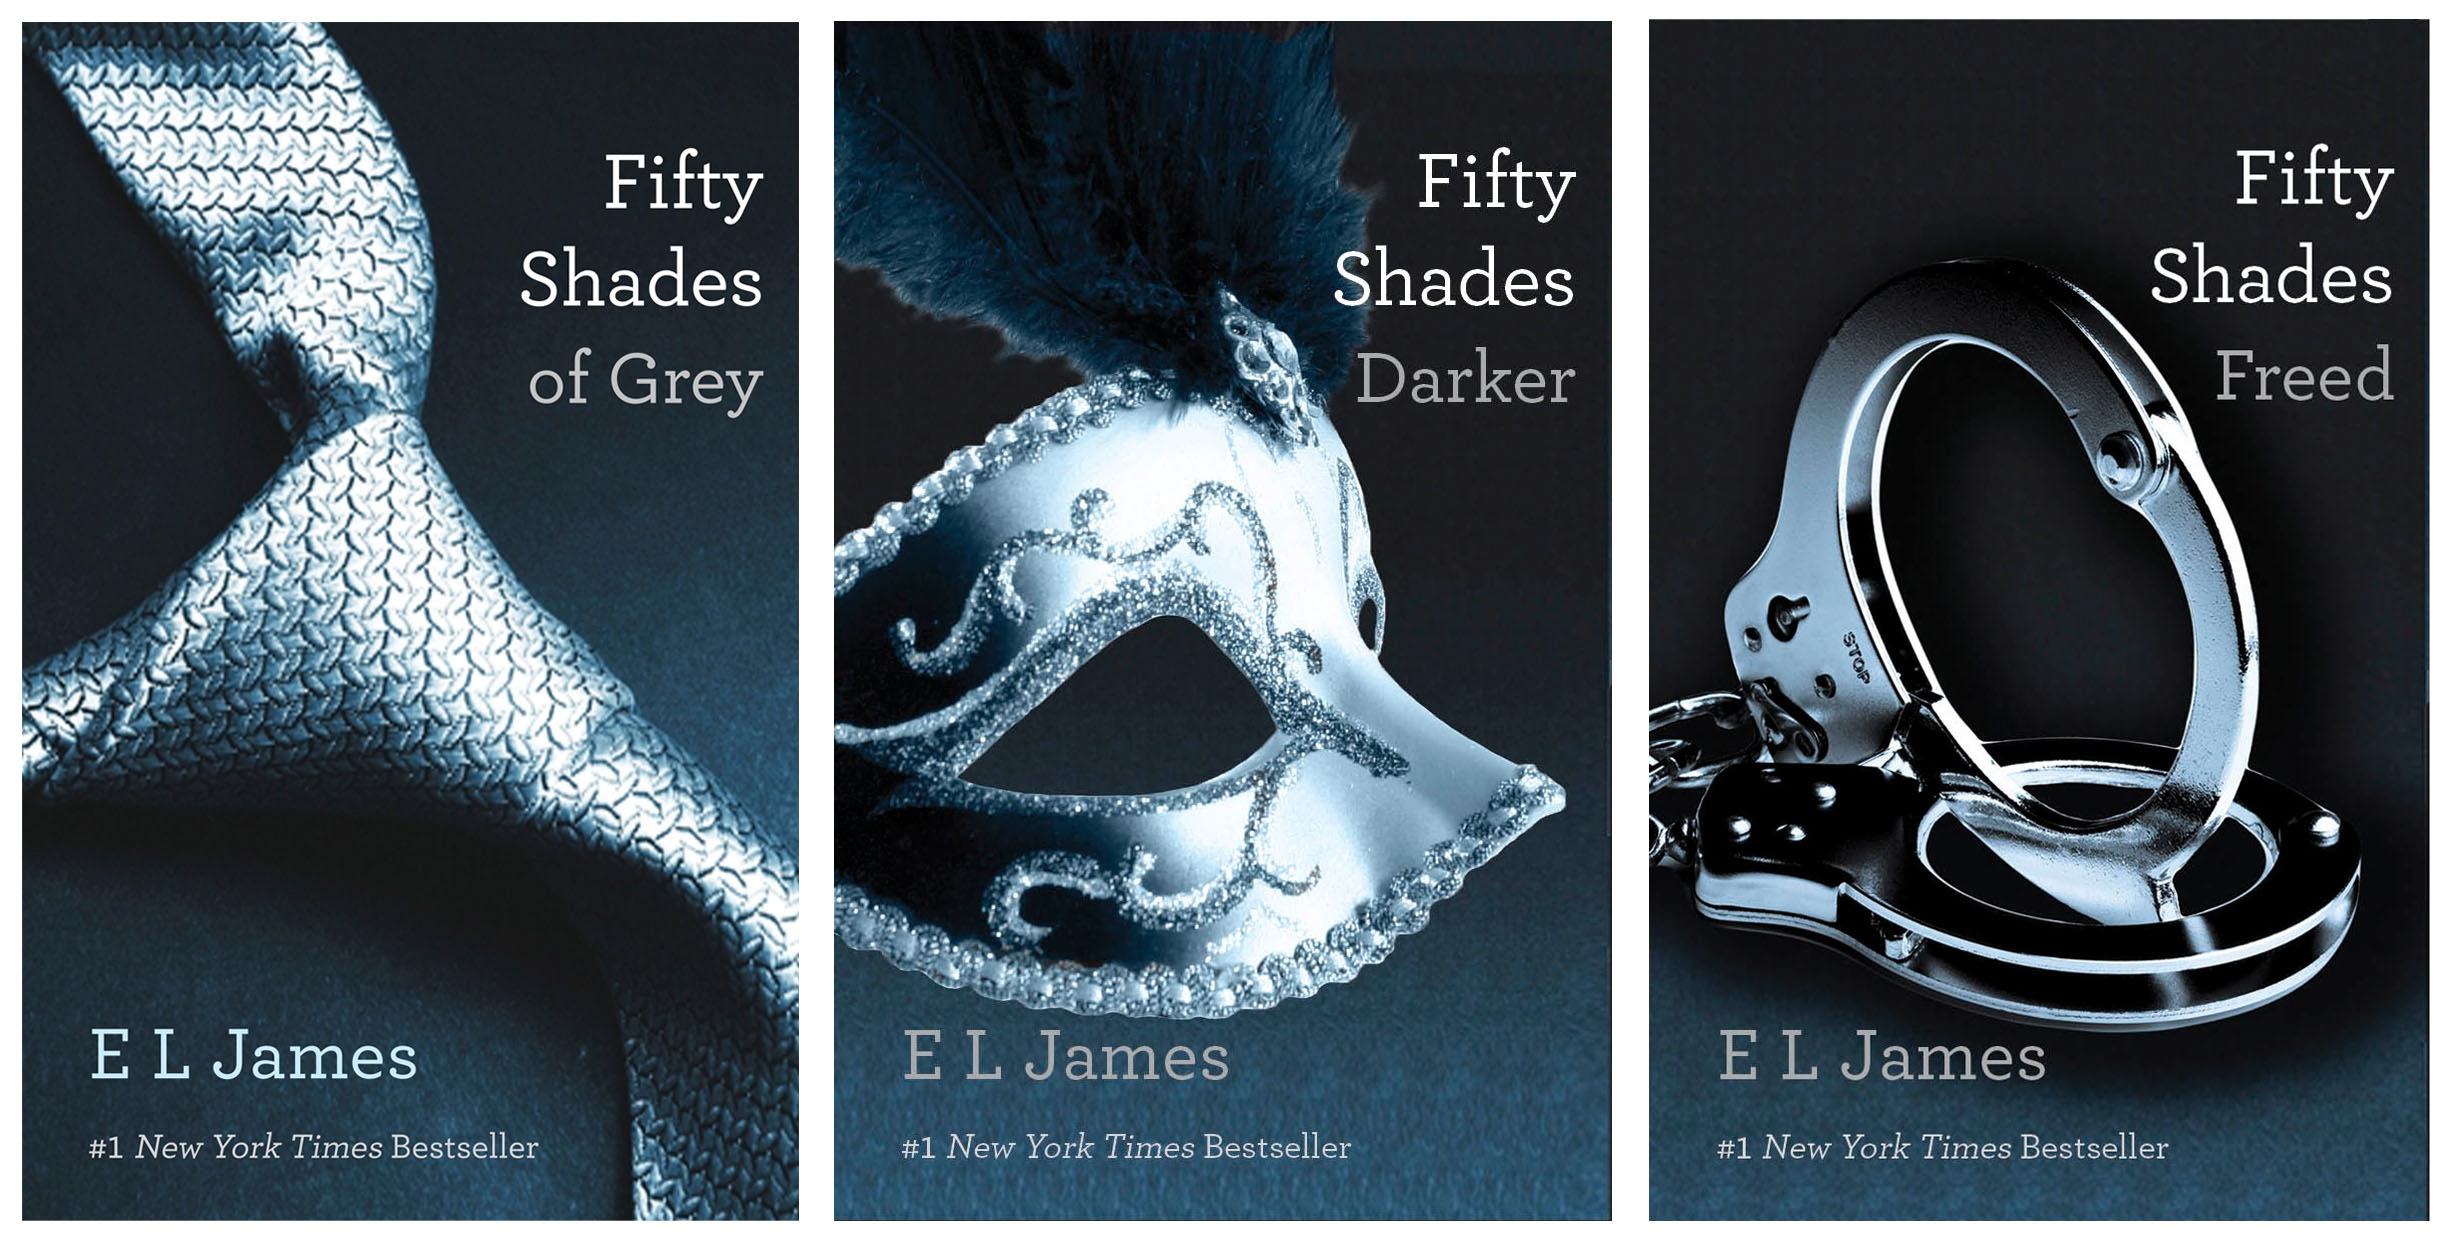 Vintage Books
The &quot;Fifty Shades of Grey&quot; trilogy by best-selling author E L James. EL James' erotic trilogy was easily the year's biggest hit, selling more than 35 million copies in the U.S. alone and topping bestseller lists for months.